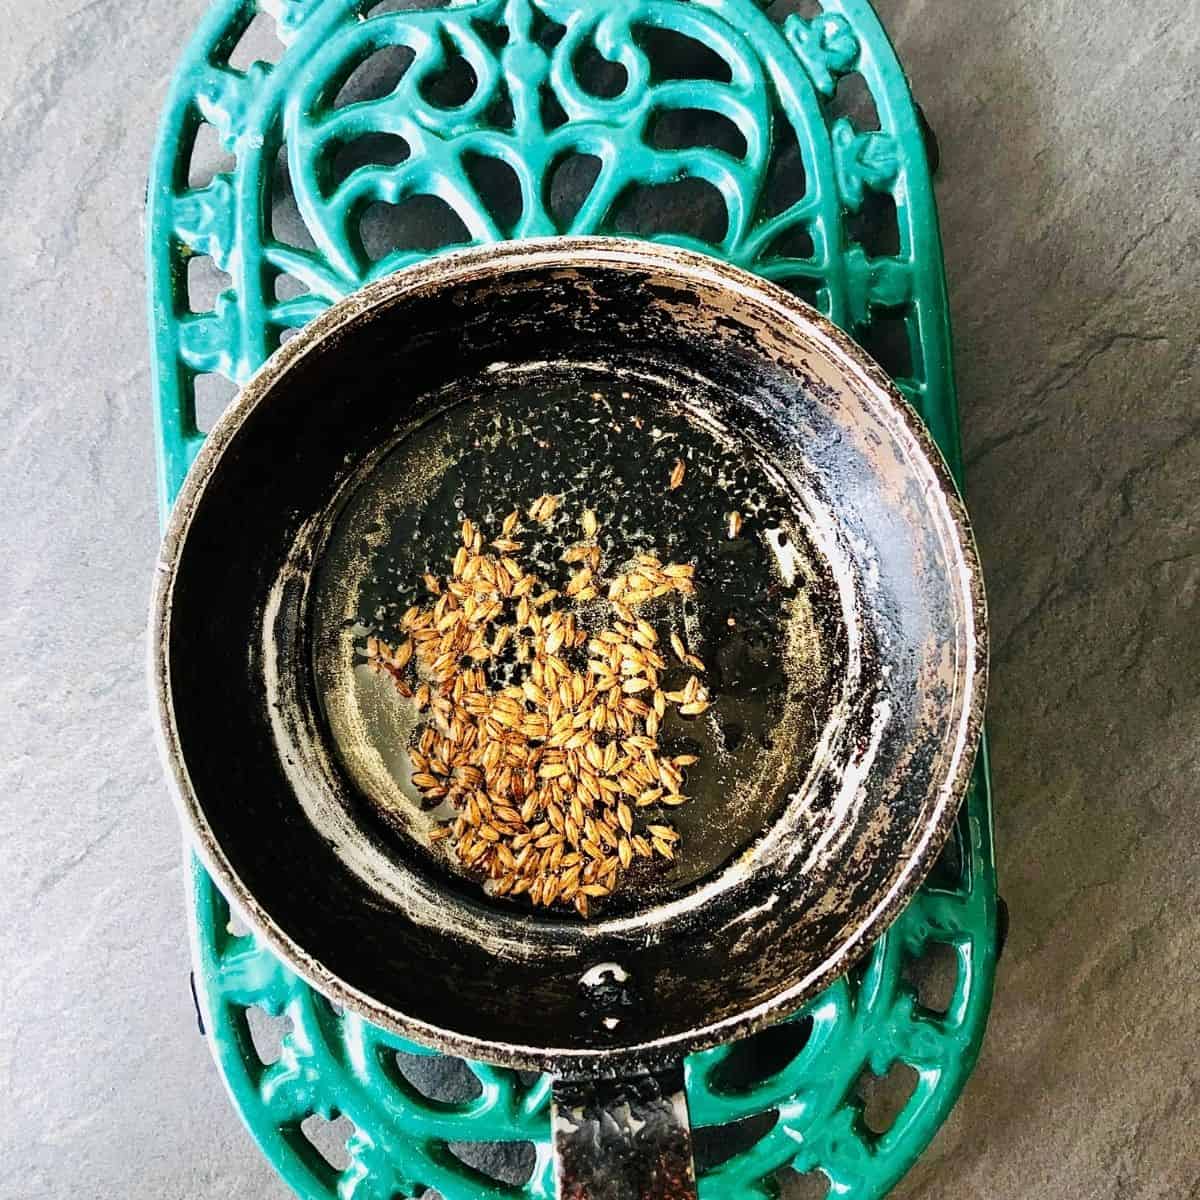 A small frying pan containing bloomed cumin seeds and nigella seeds